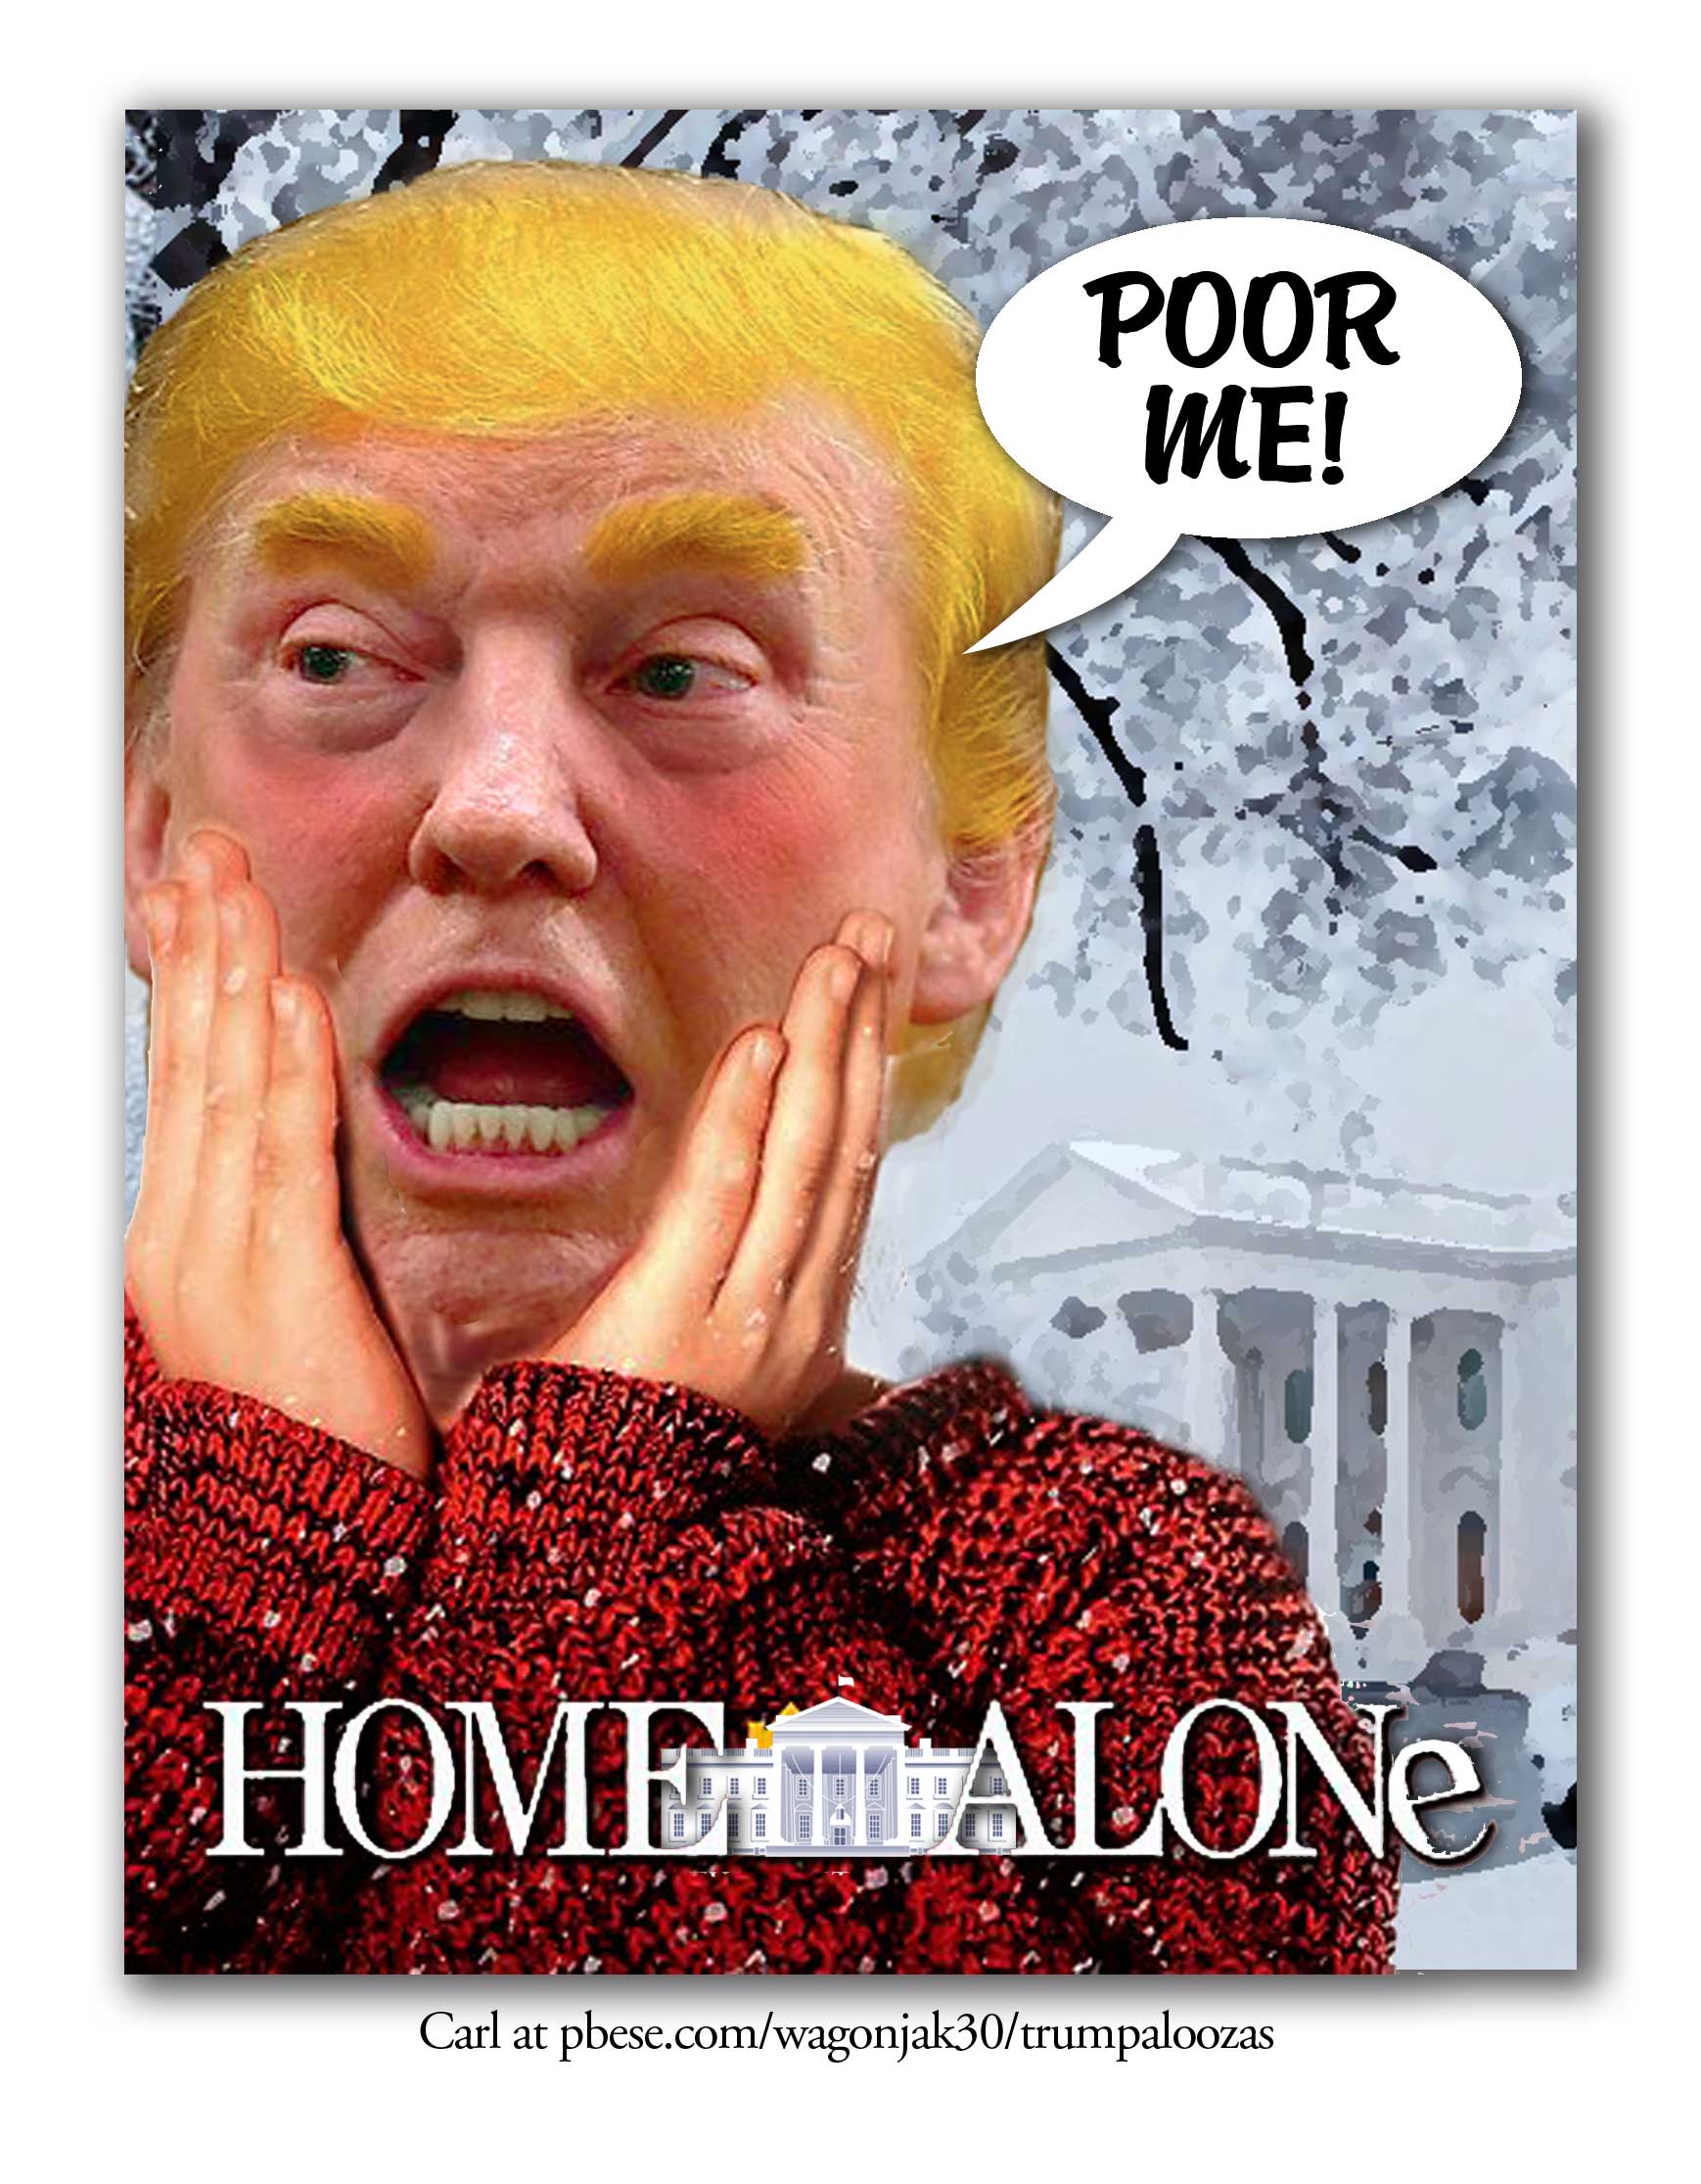 Home Alone Donny